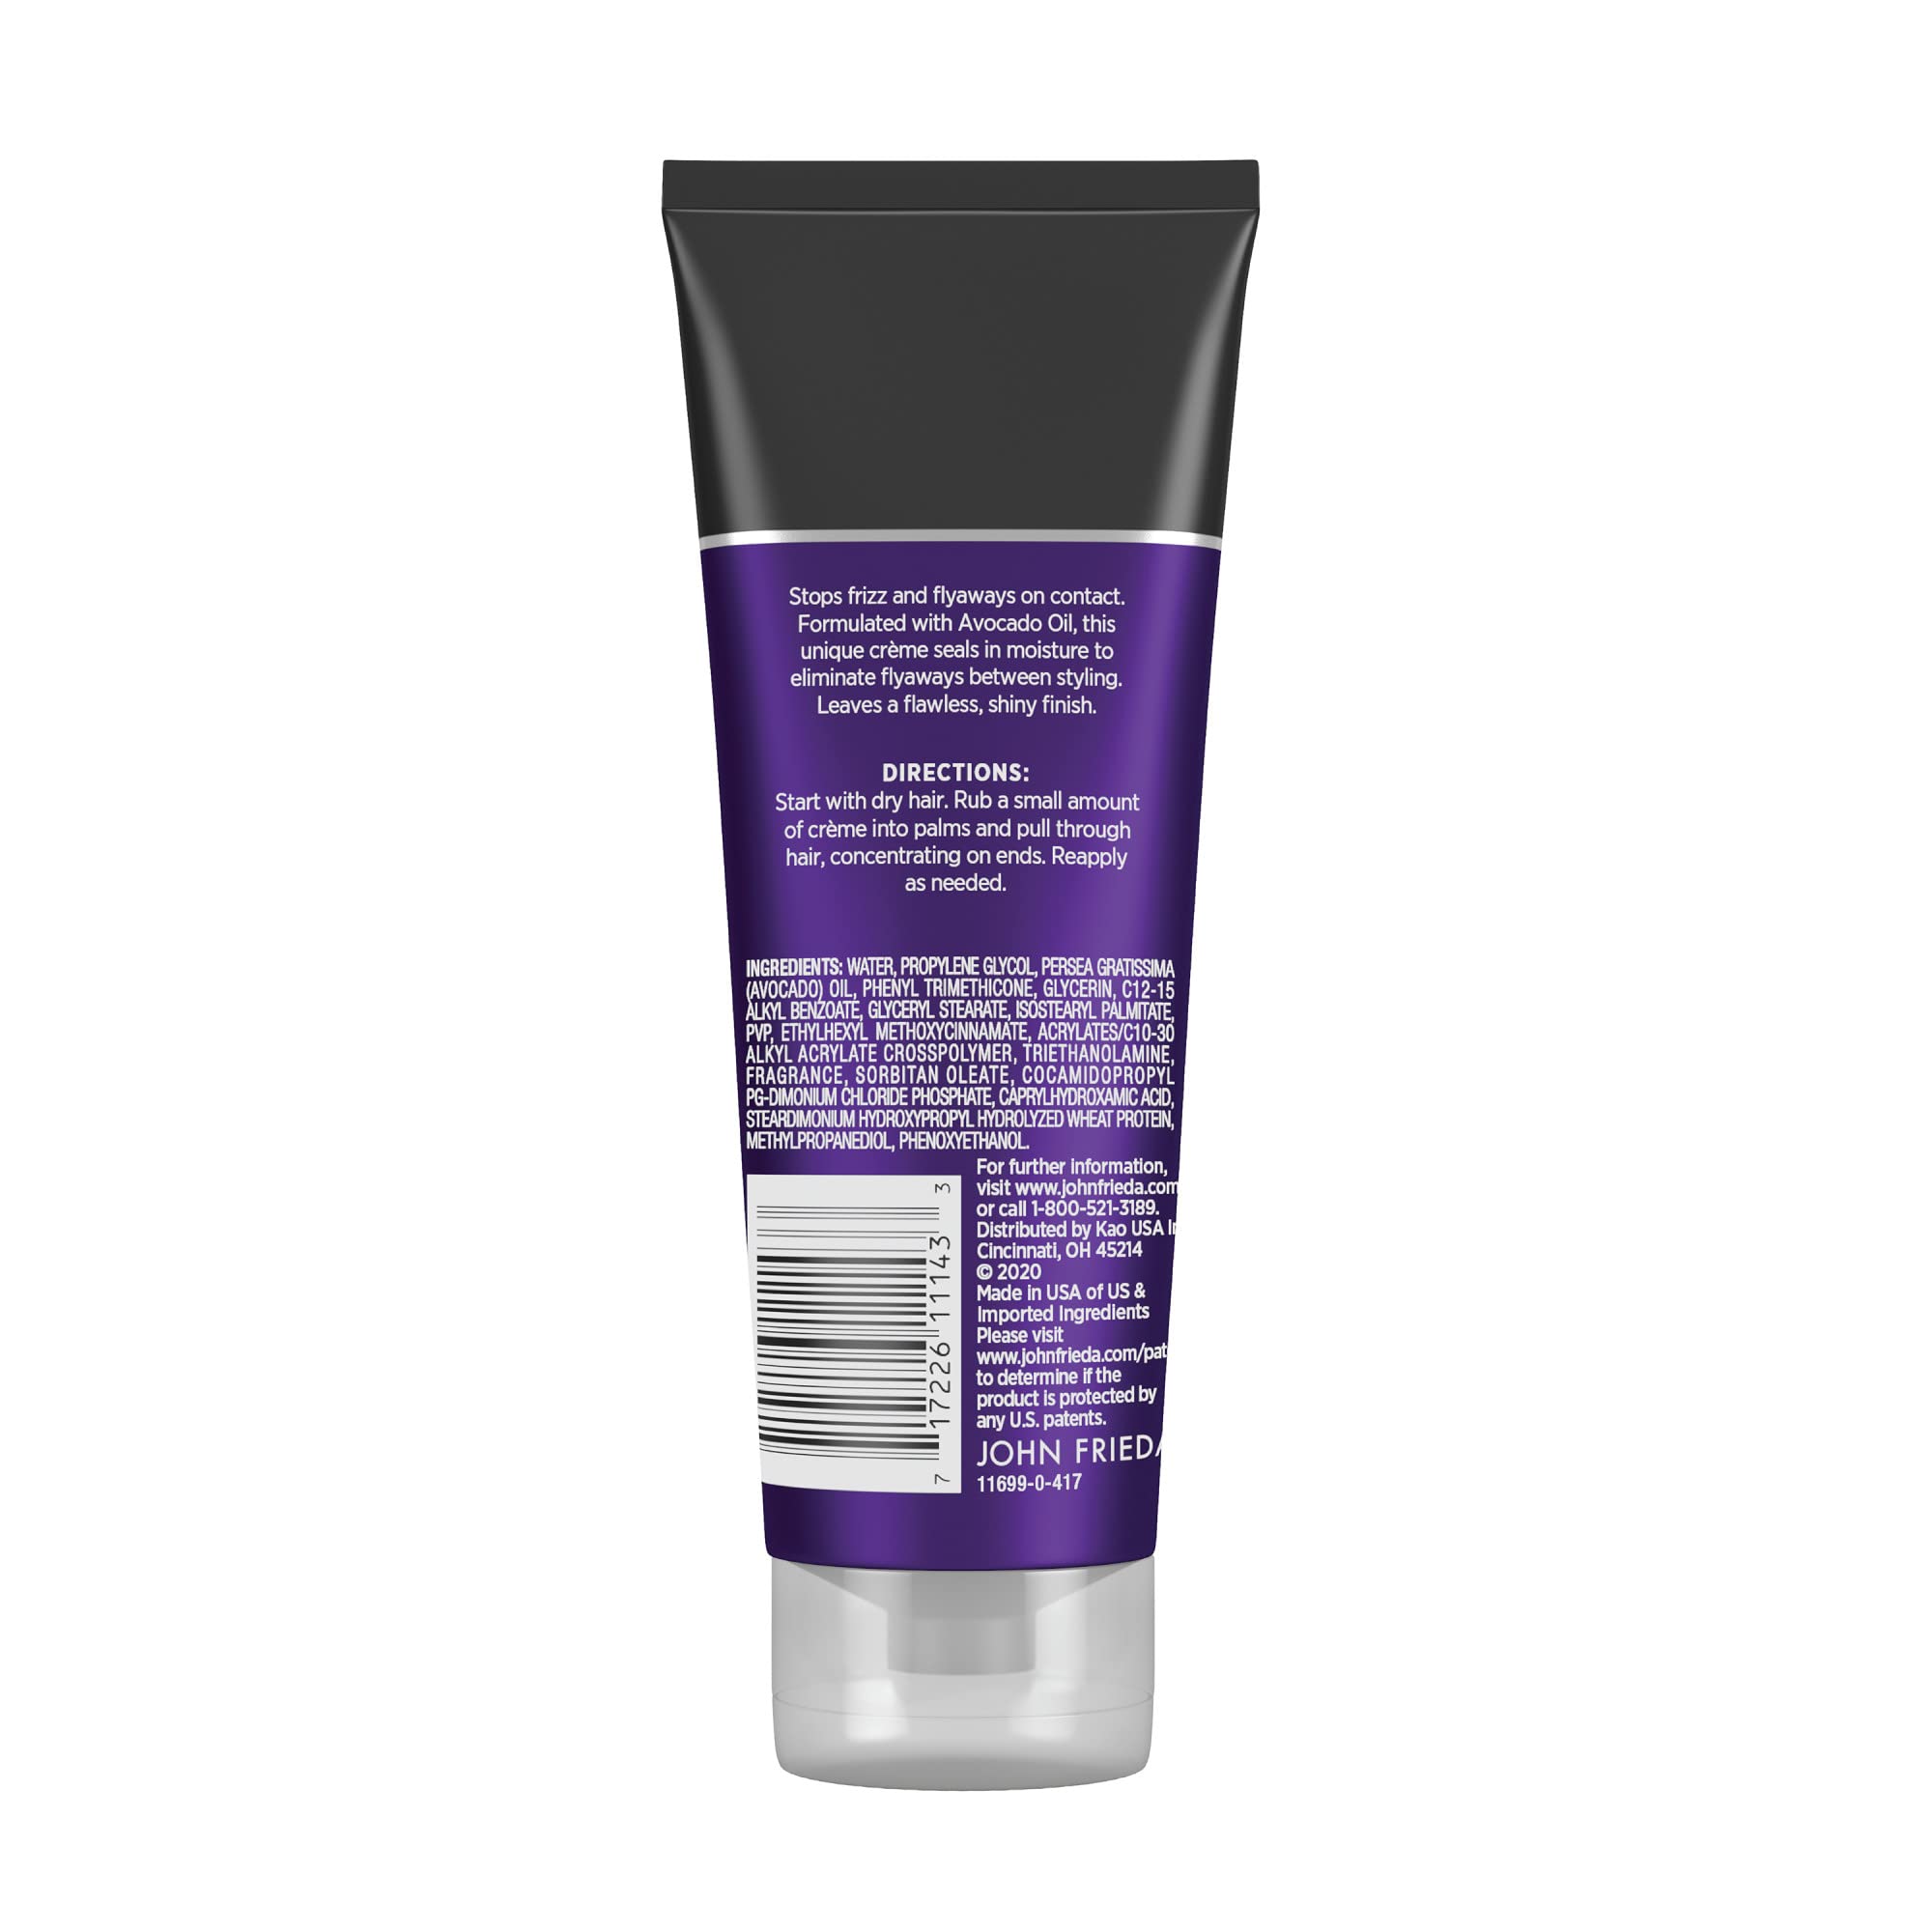 John Frieda Anti Frizz, Frizz Ease Secret Weapon Touch Up Hair Cream, Anti-Frizz Styling Cream, Helps to Calm and Smooth Frizz-prone Hair, 4 oz (Pack of 2)